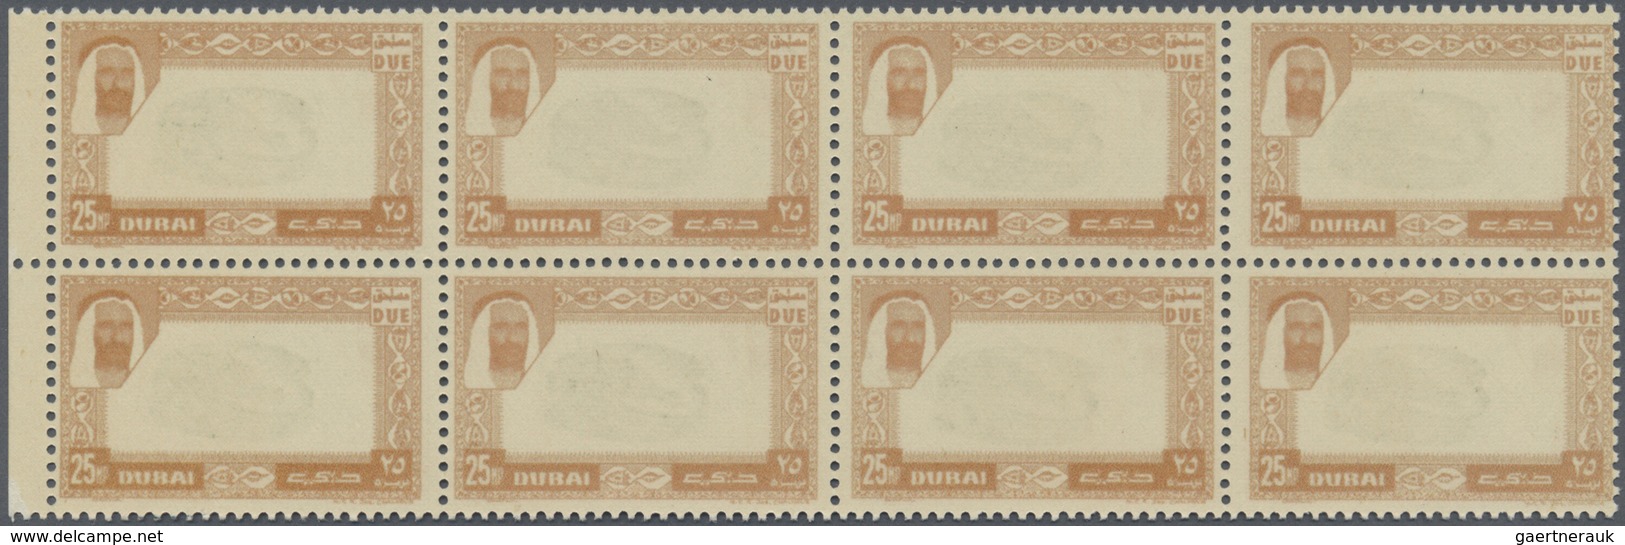 ** Dubai - Portomarken: 1963, Mussel 25np. With 2nd Printing Of Dull Brown Frame On Gum Side In A Perf. - Dubai